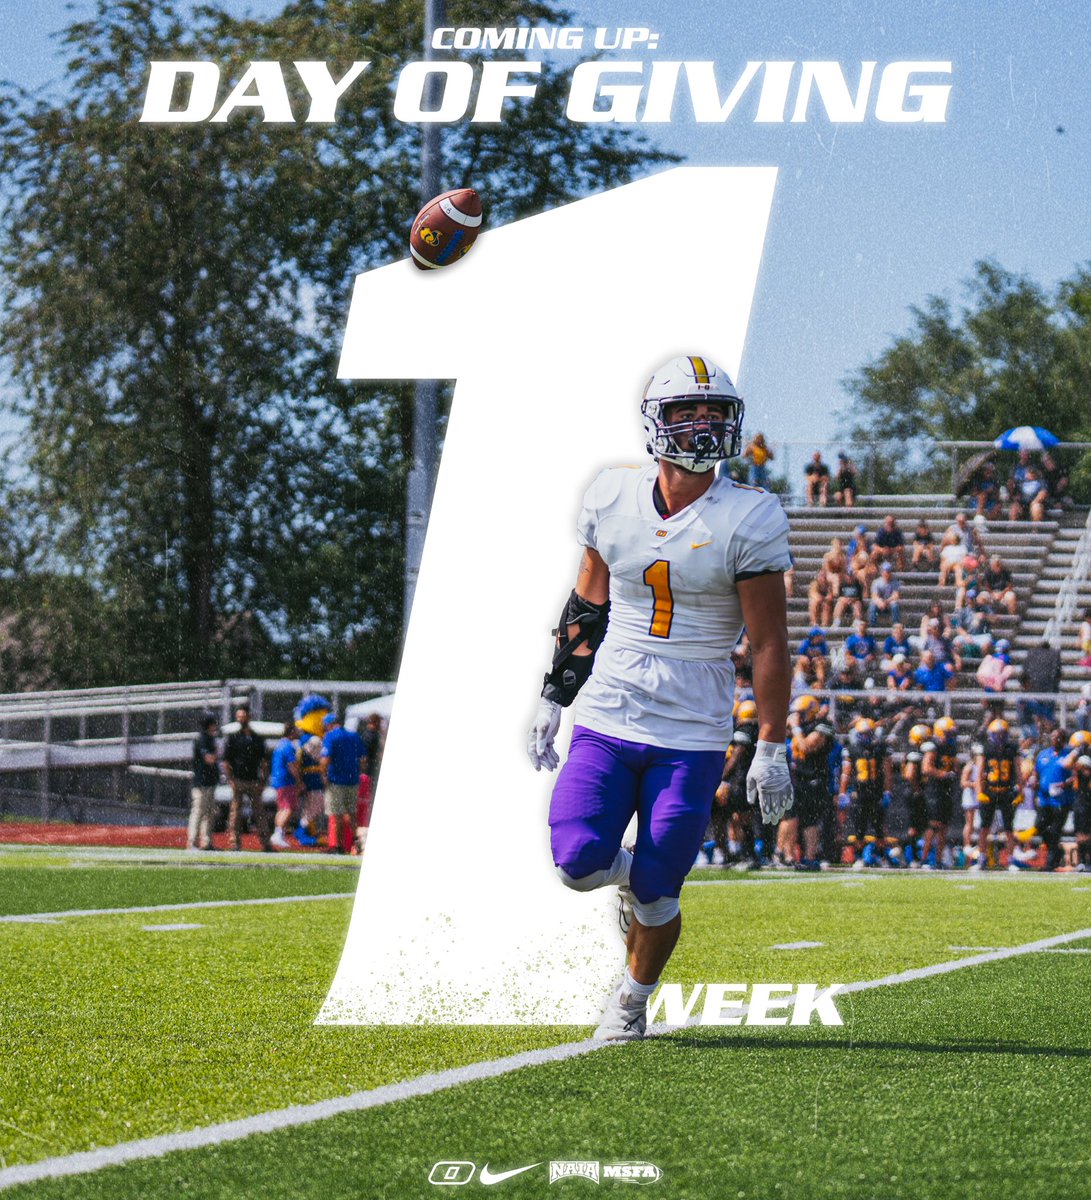 Day of Giving is in 1️⃣ week! The football program is raising money for things like team equipment (cleats, helmets, shoulder pads), remodeling our facilities, and our leadership retreat in the fall! 💪🏼 Click the link to donate to your ONAZ football team: olivet.edu/football